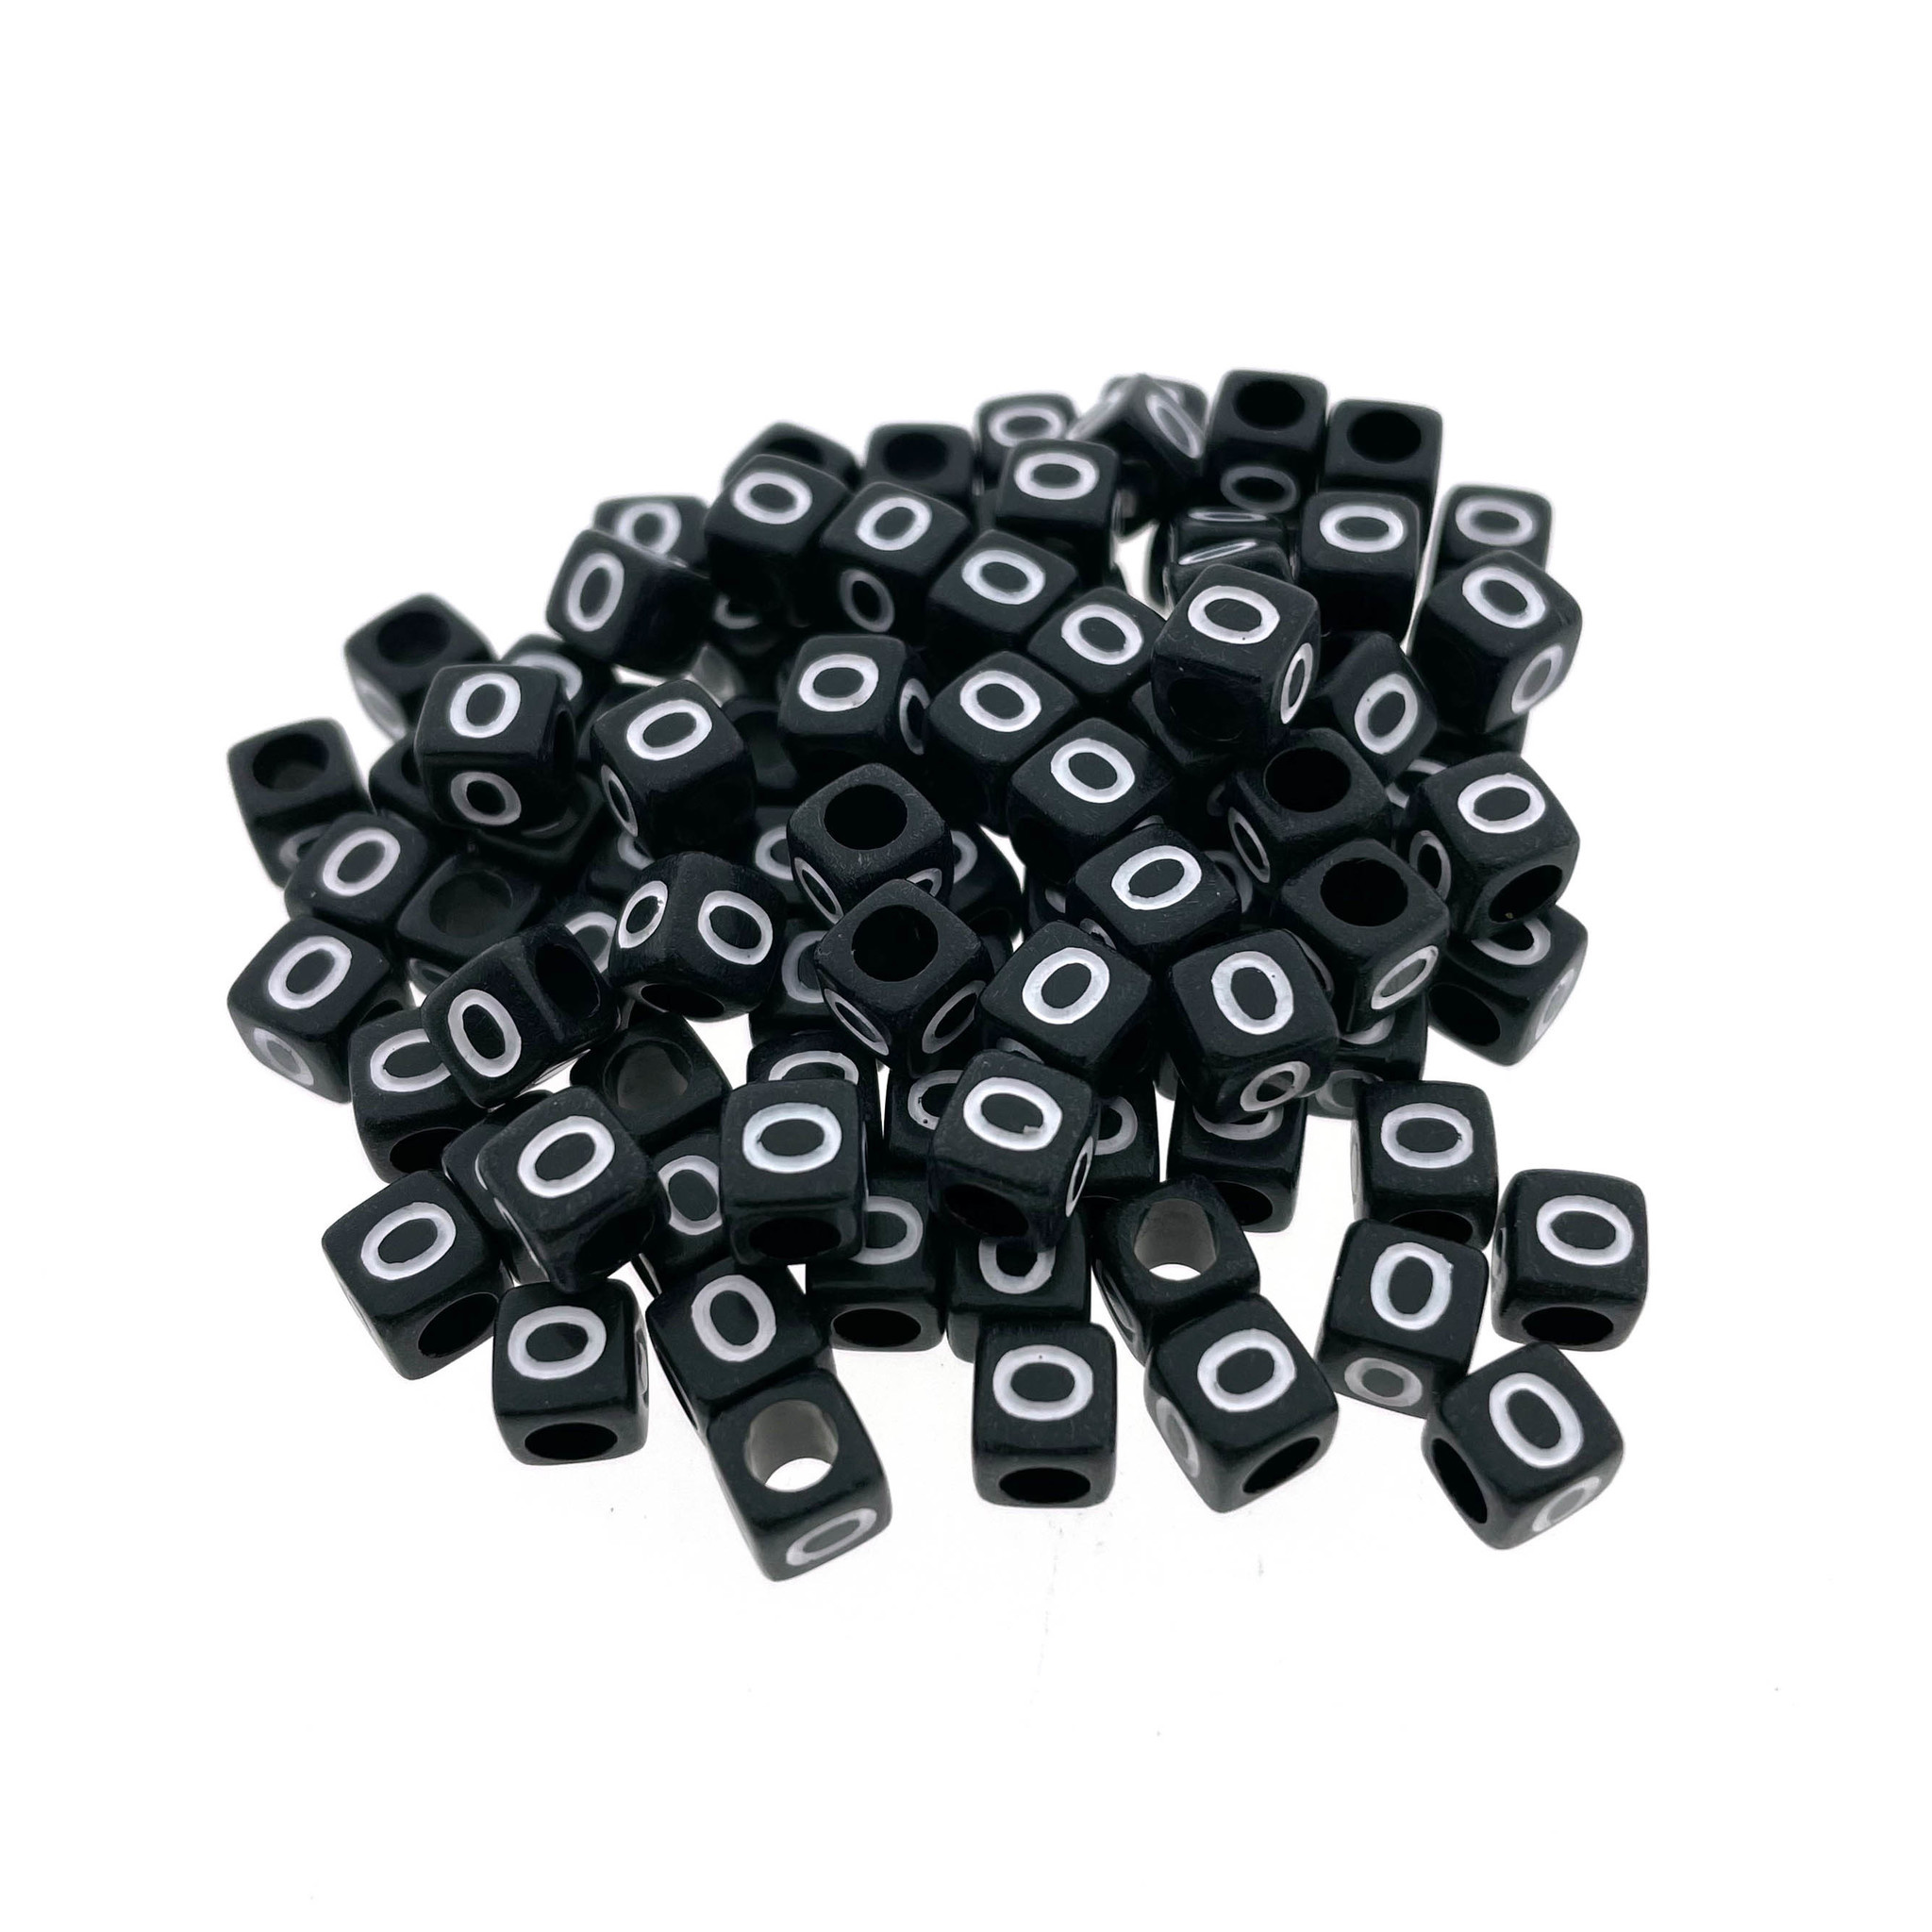 Buy Paracord alphabet letter beads Black O at 123Paracord - 123Paracord